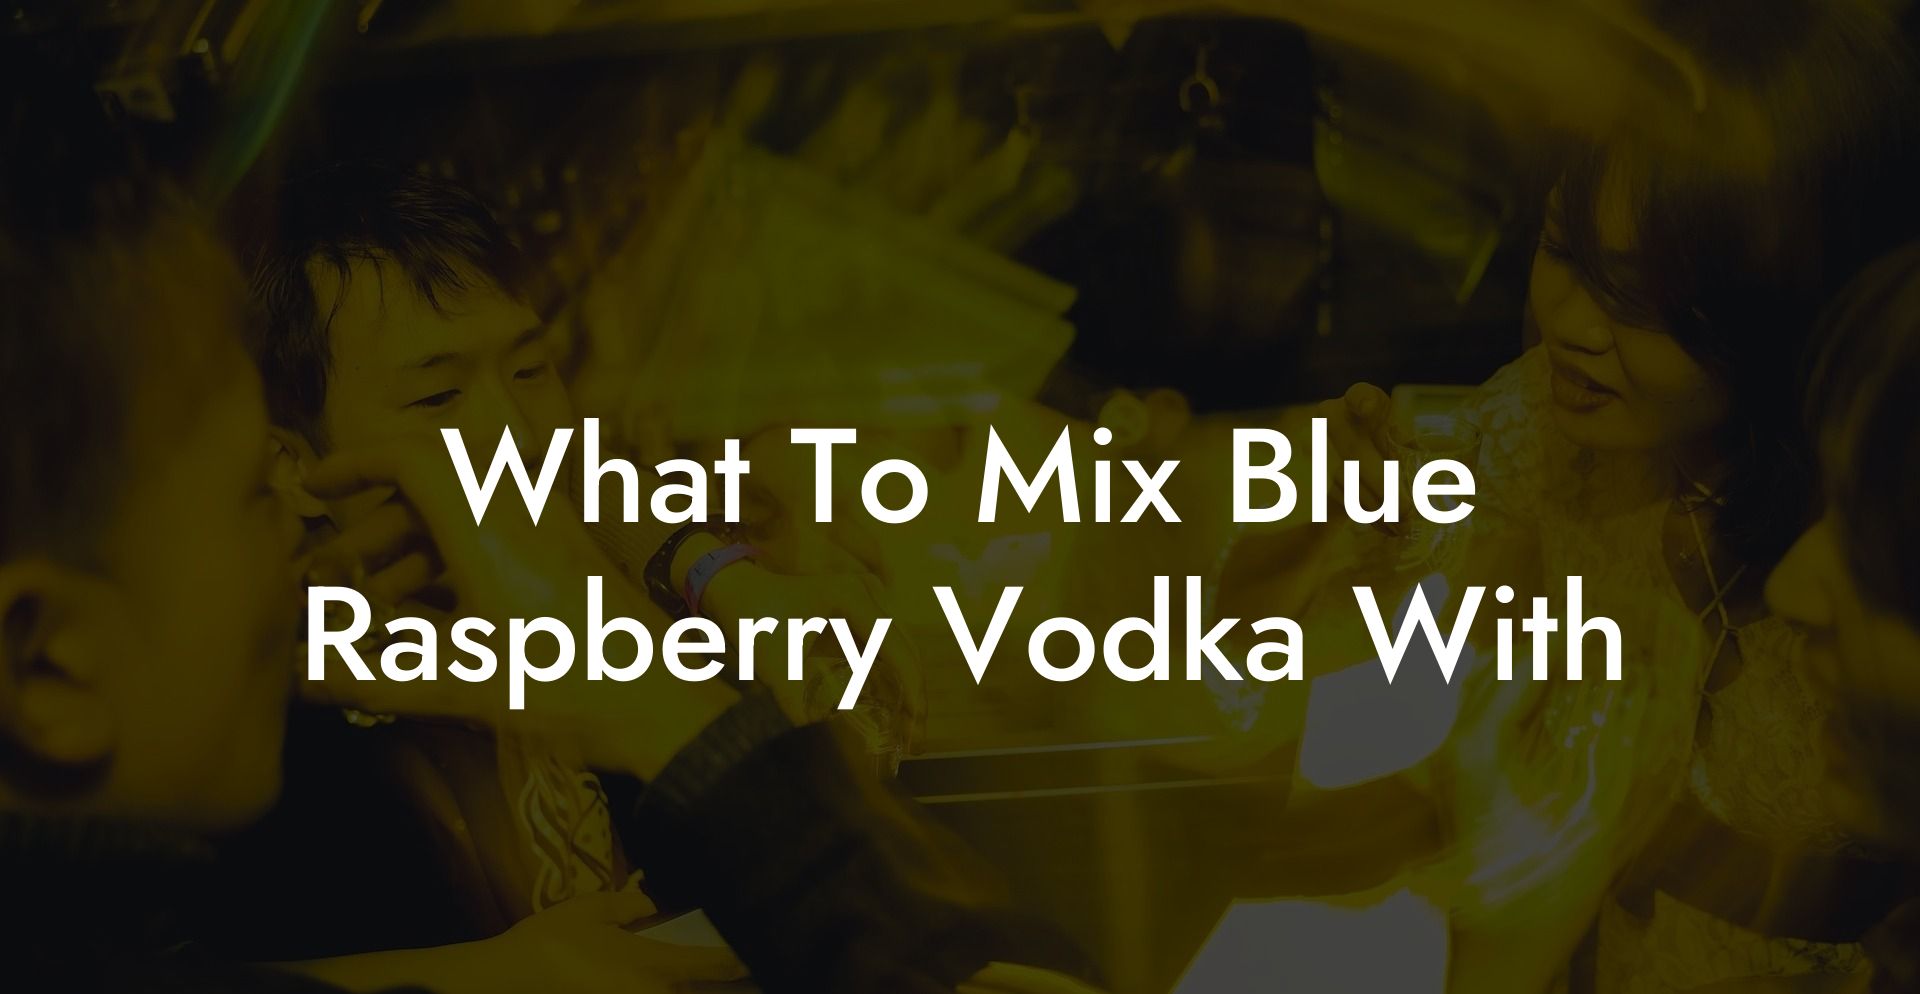 What To Mix Blue Raspberry Vodka With